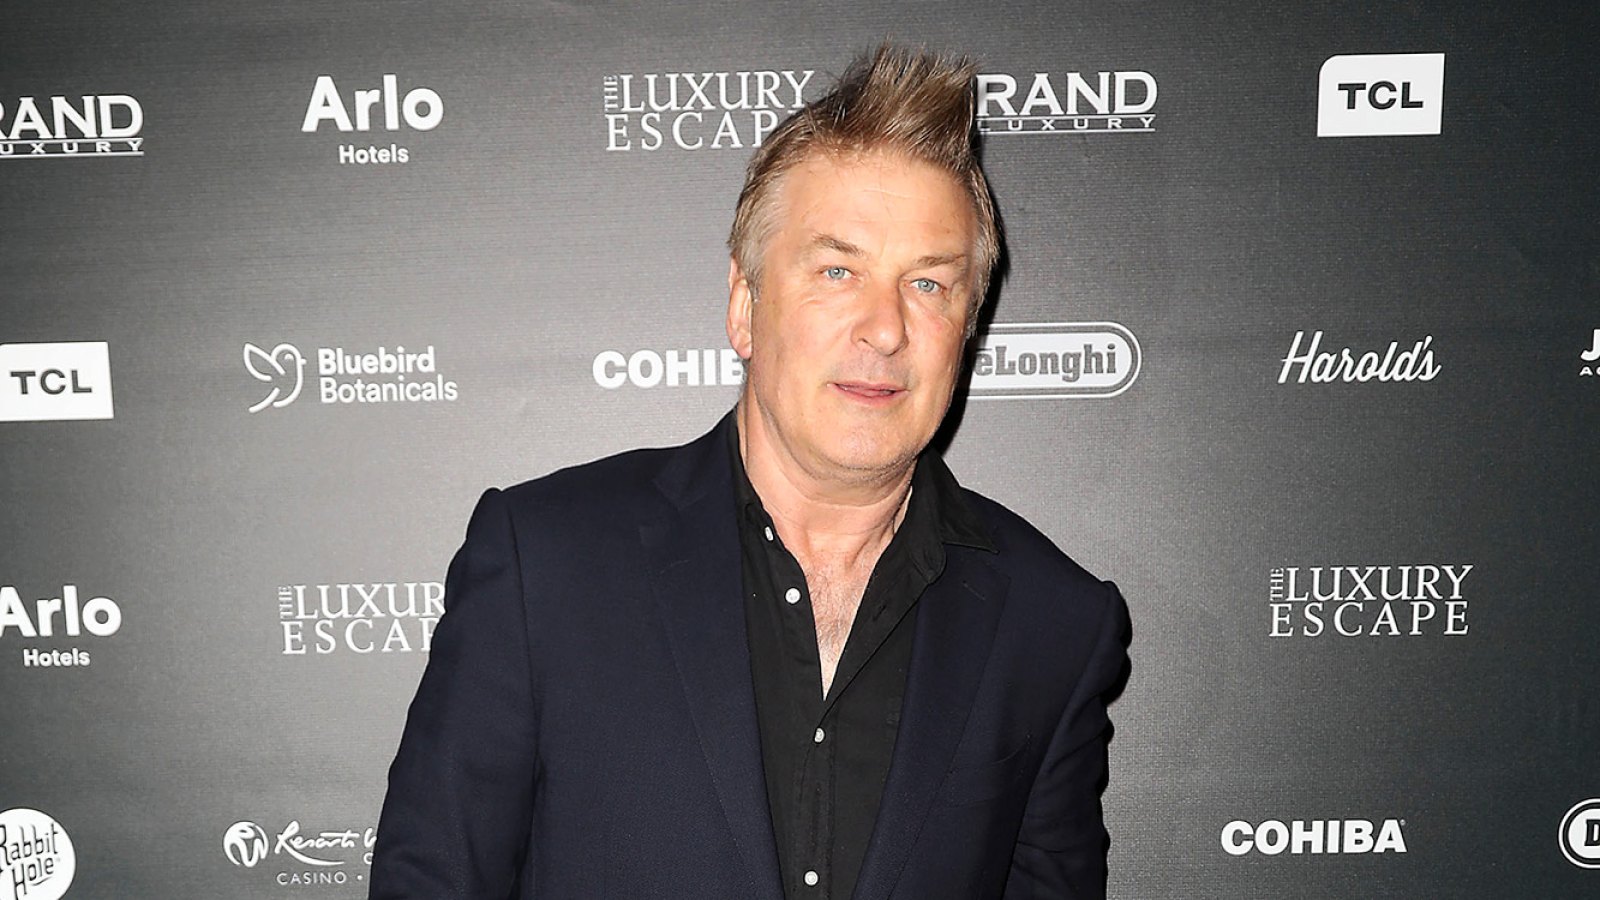 Alec Baldwin Will Star in Kent State Shooting Film After Rust Tragedy